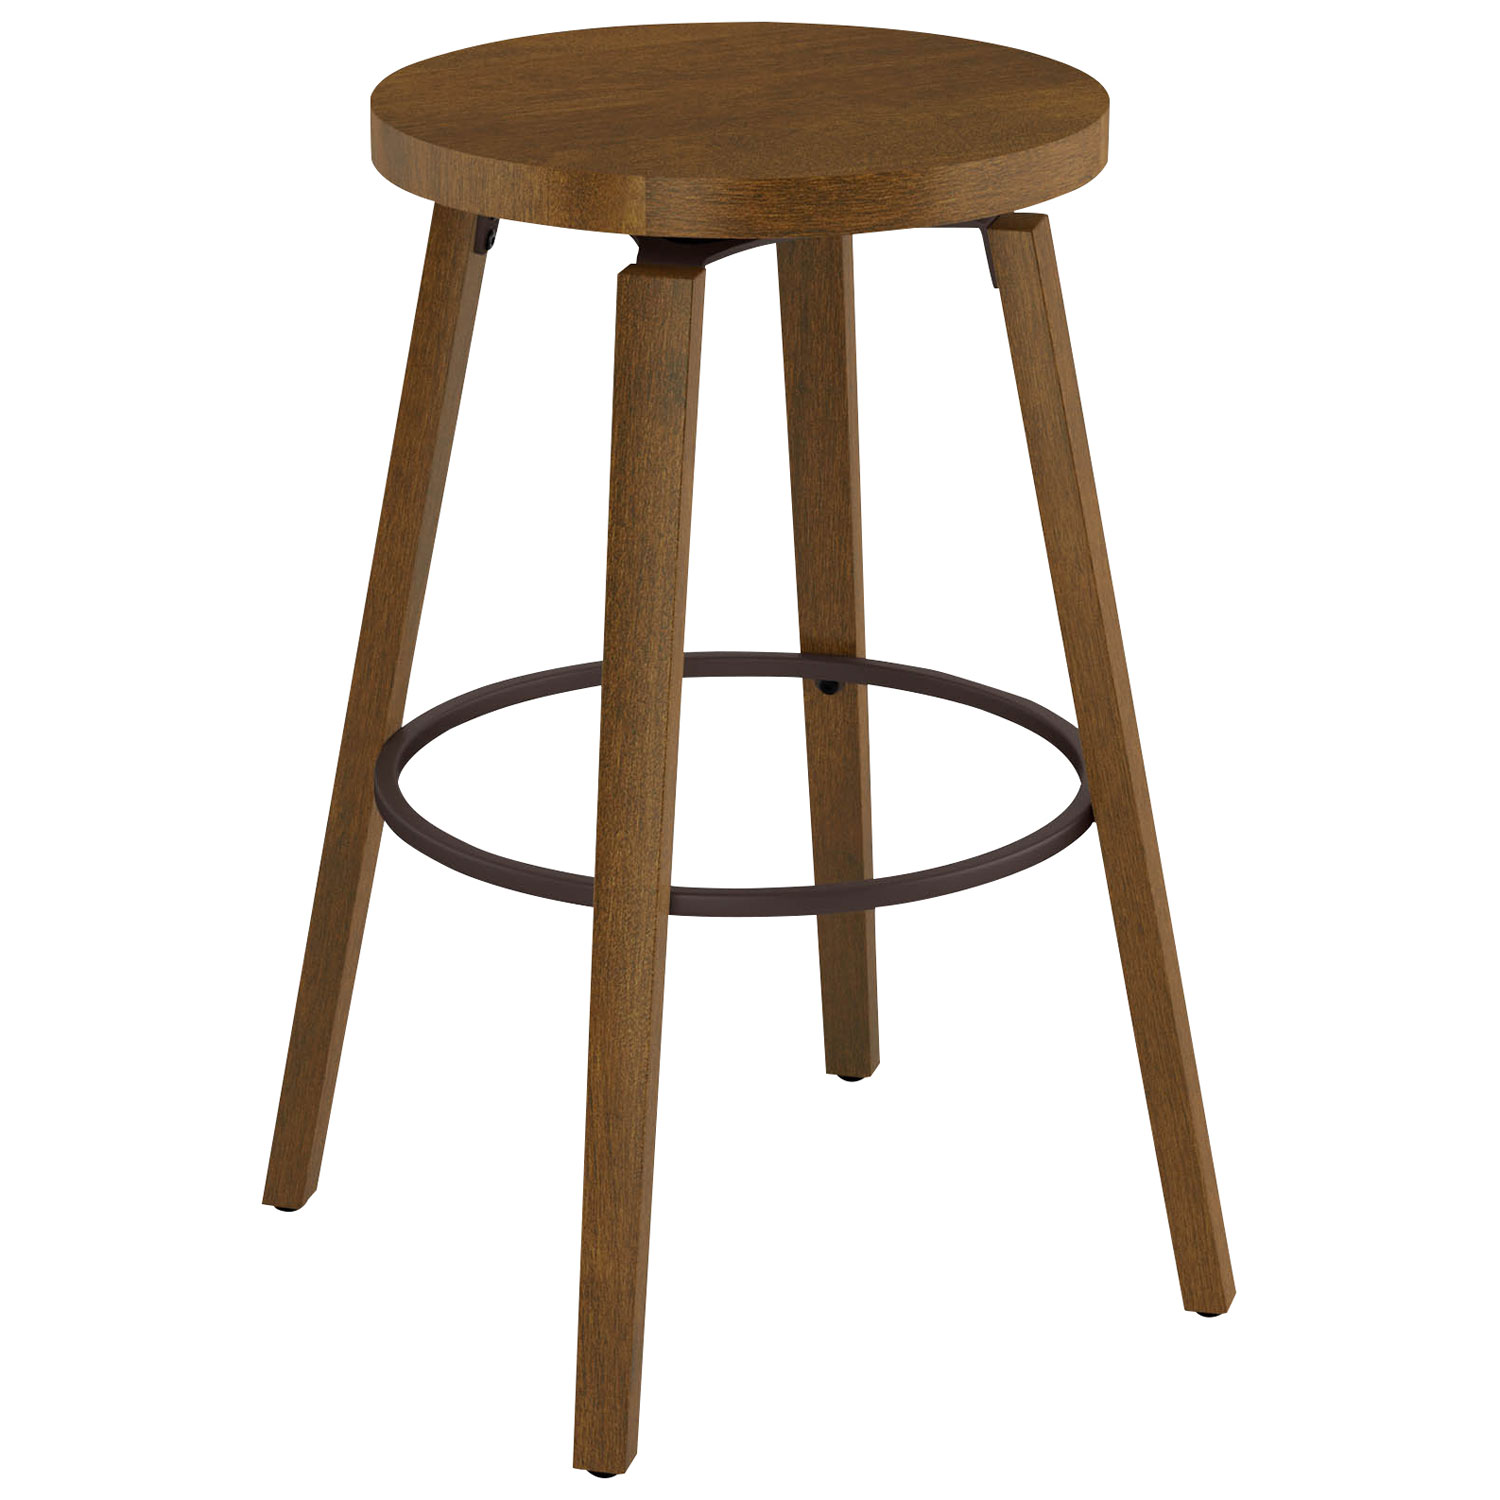 Ravi Rustic Country Counter Height Barstool - Light Brown